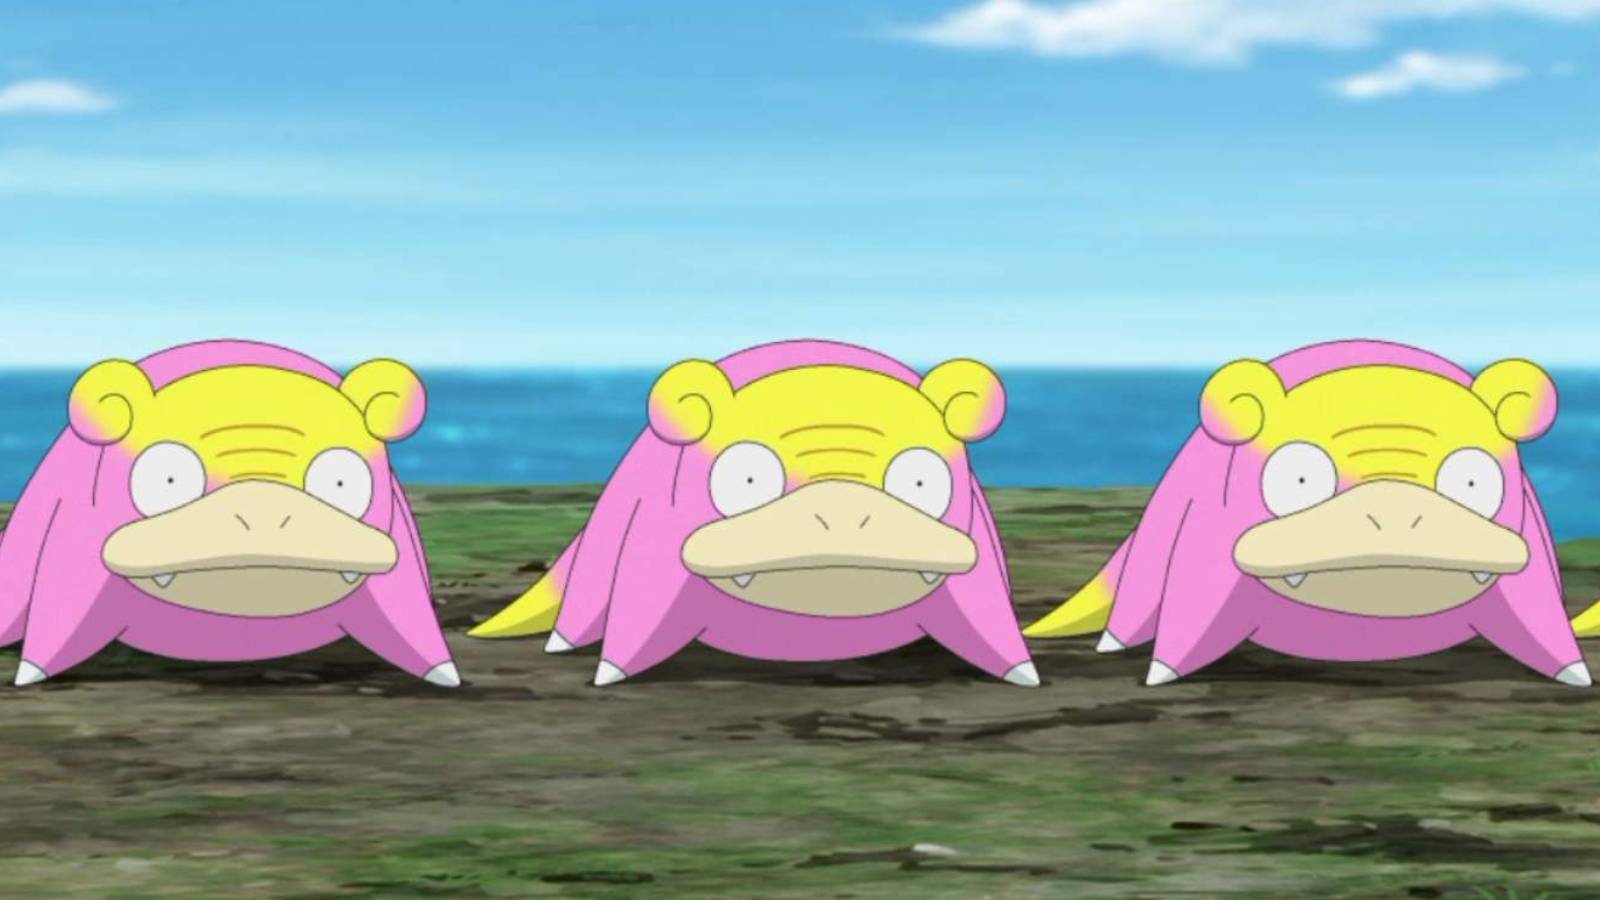 A screenshot from the Pokemon anime shows several Galarian Slowpoke in a row